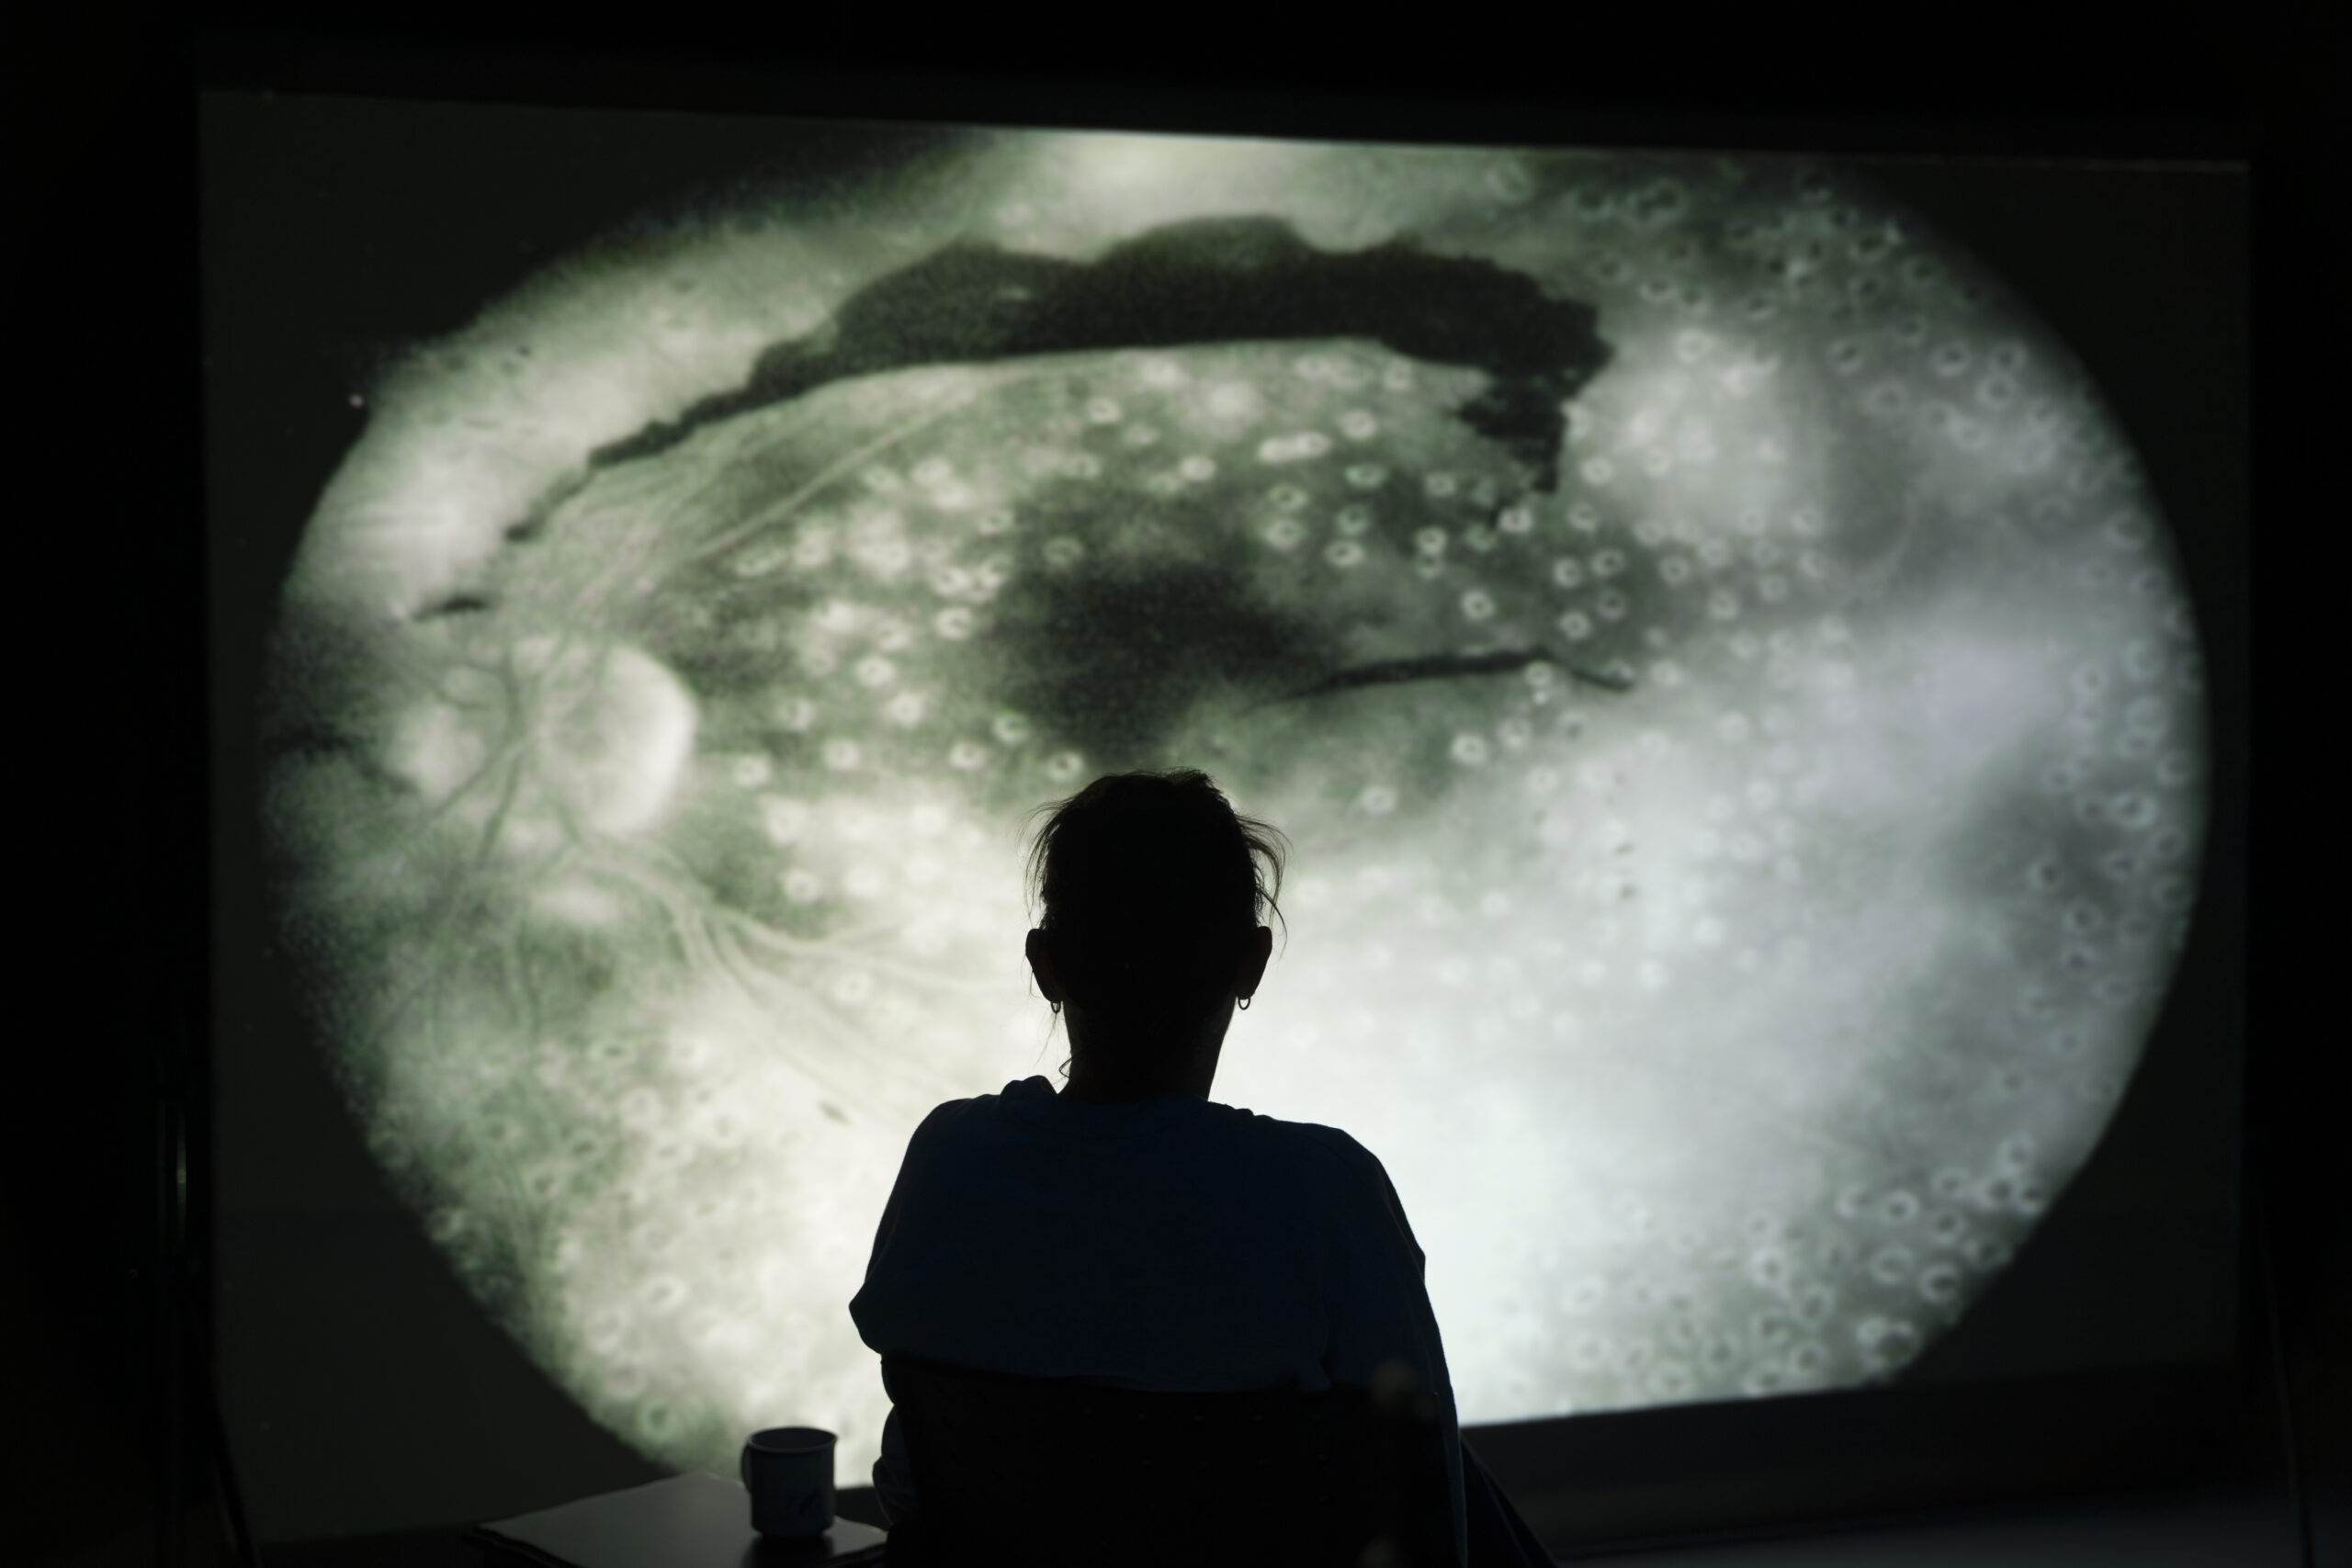 A silhouette of a person looking at a projector screen, which displays a medical photo of an eye